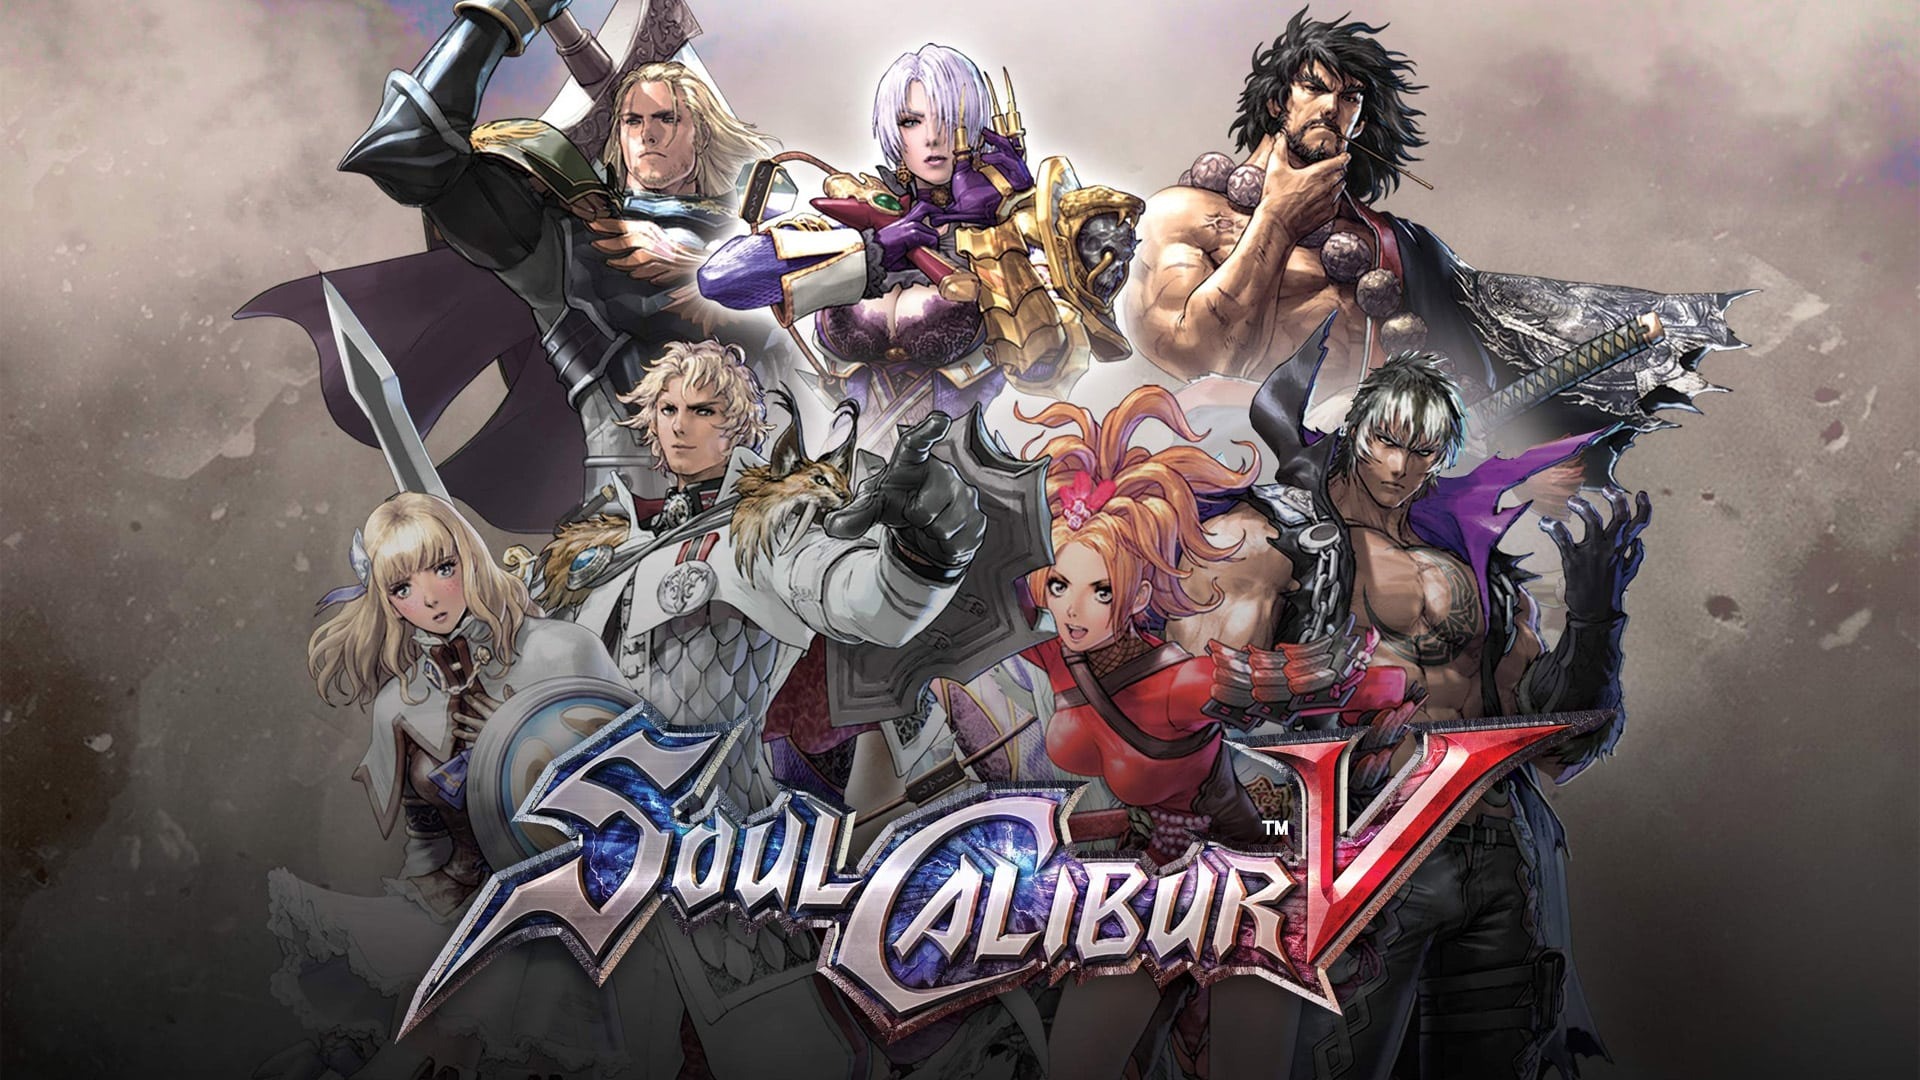 Soulcalibur V to Be Delisted on PlayStation 3, Xbox 360 Next Week